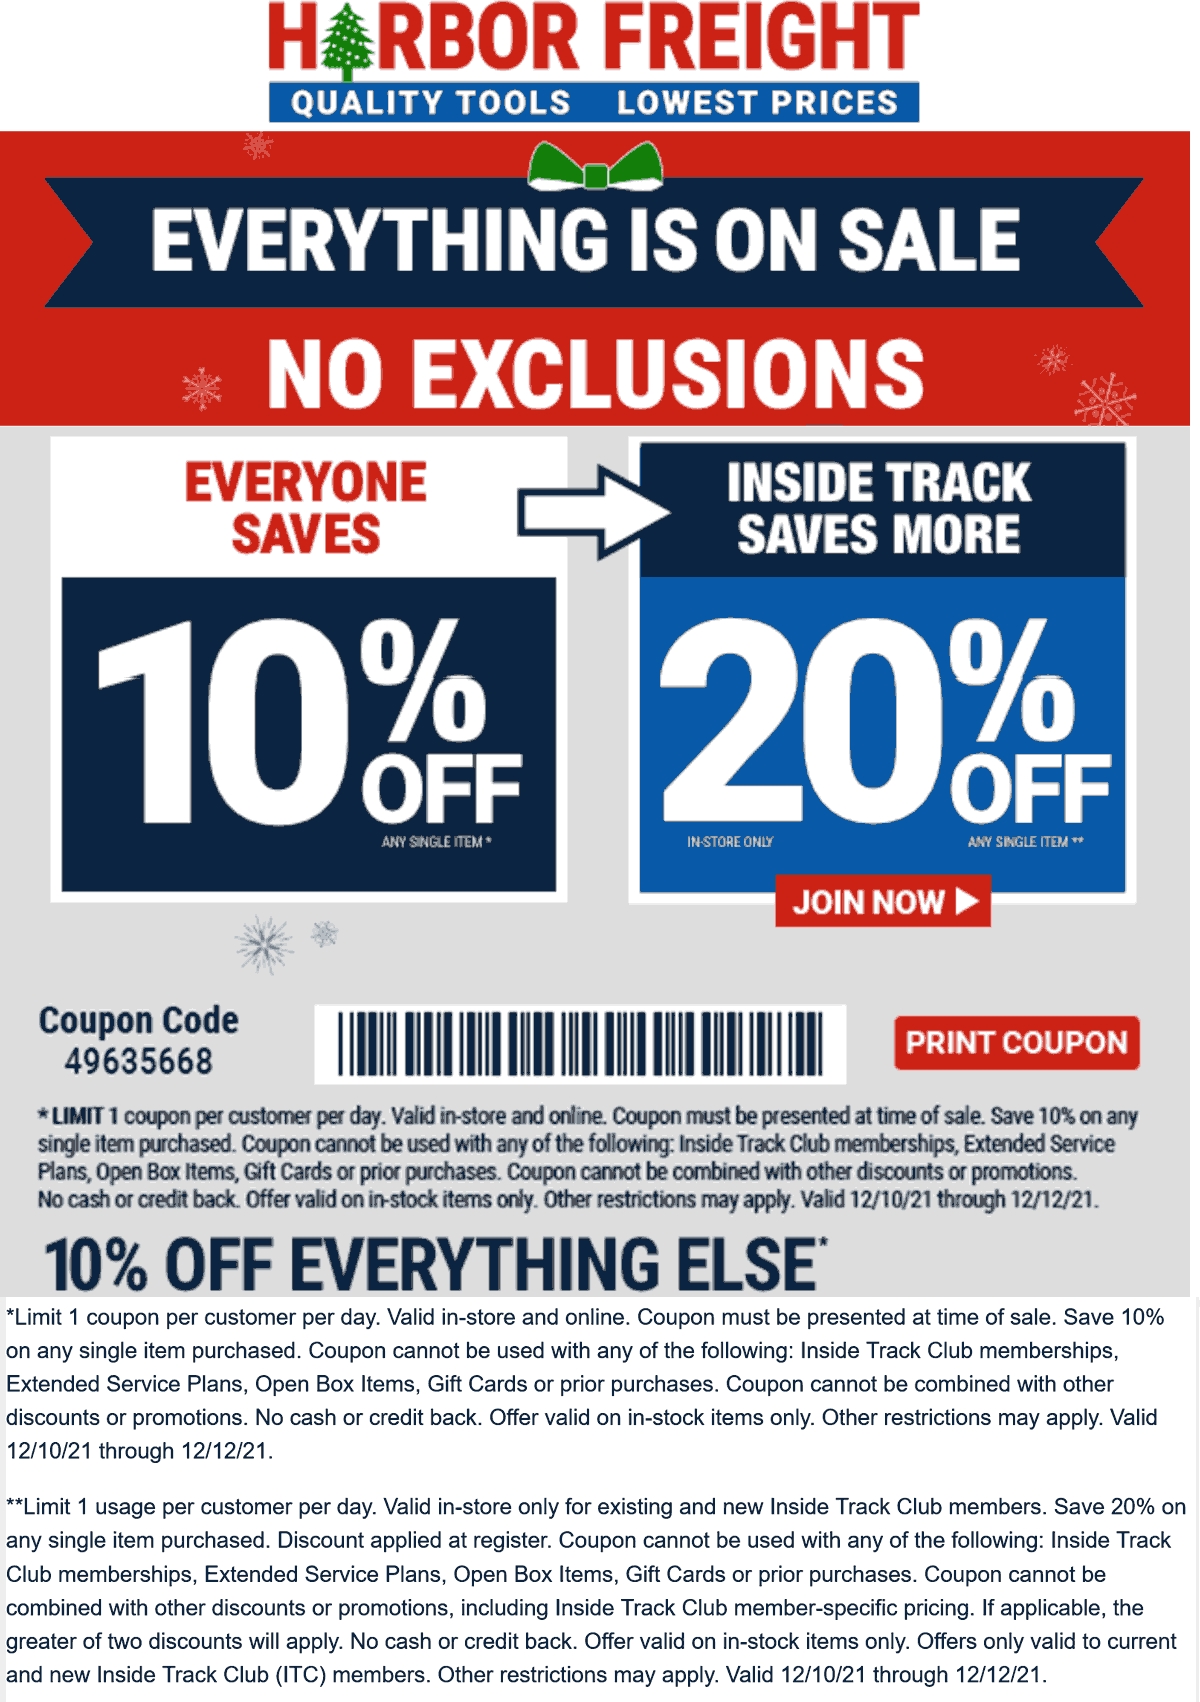 [November, 2022] 1020 off everything at Harbor Freight Tools 